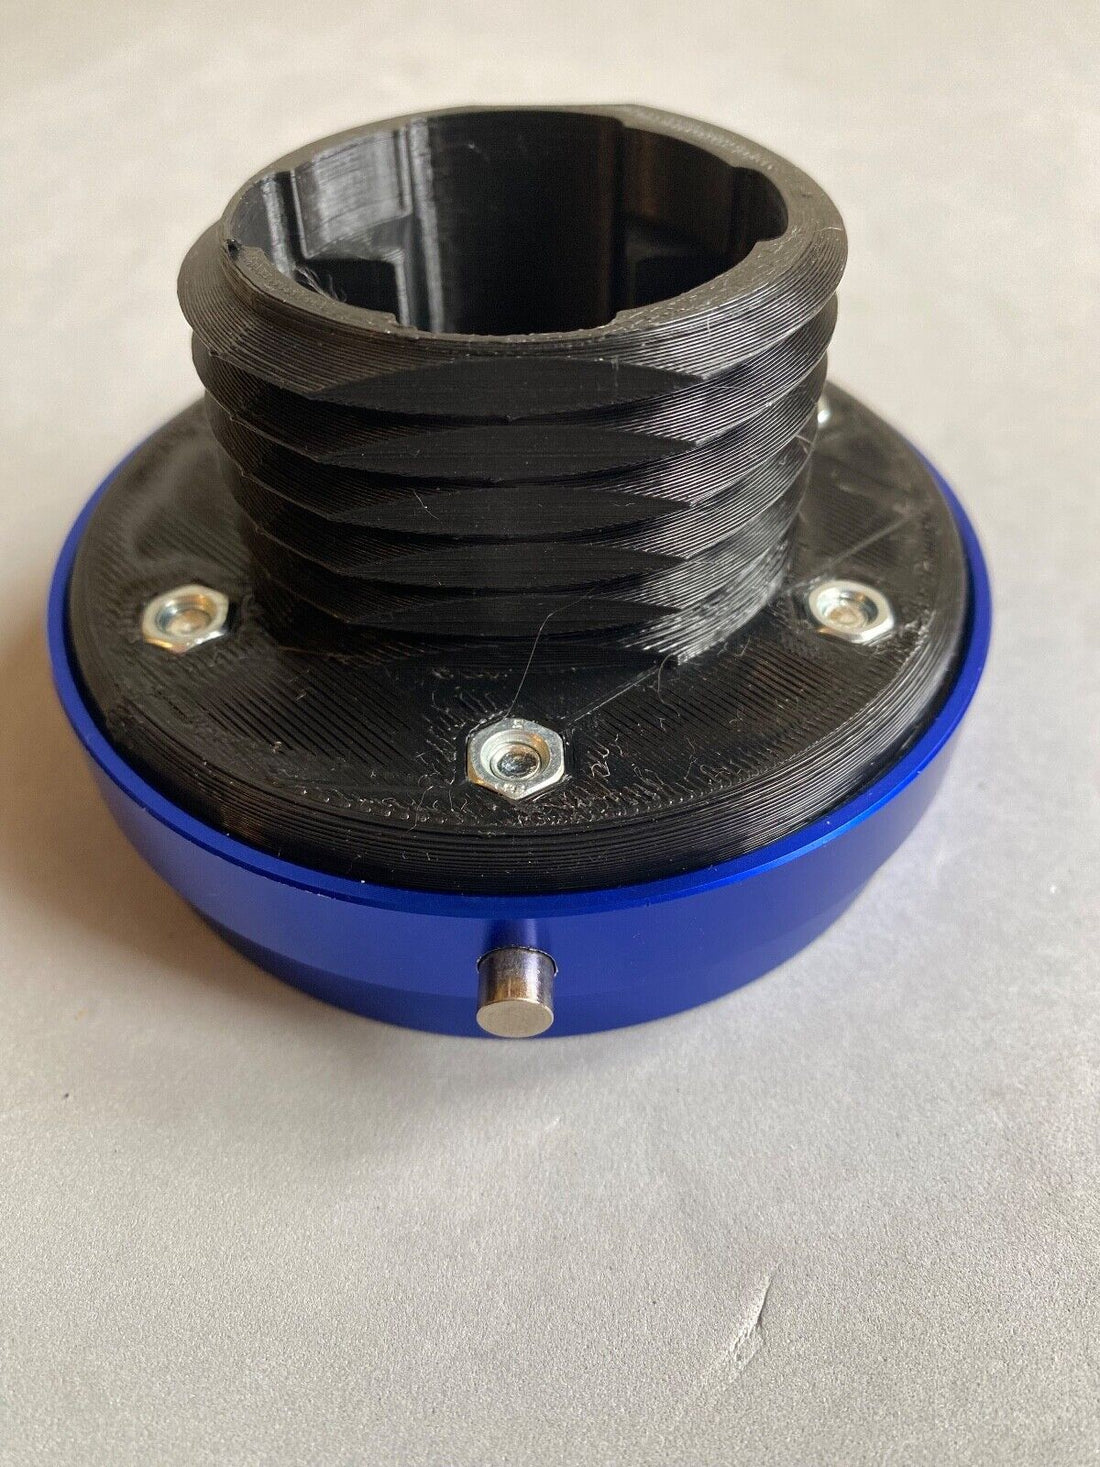 Thrustmaster Quick Release For Thrustmaster Wheels and Servo